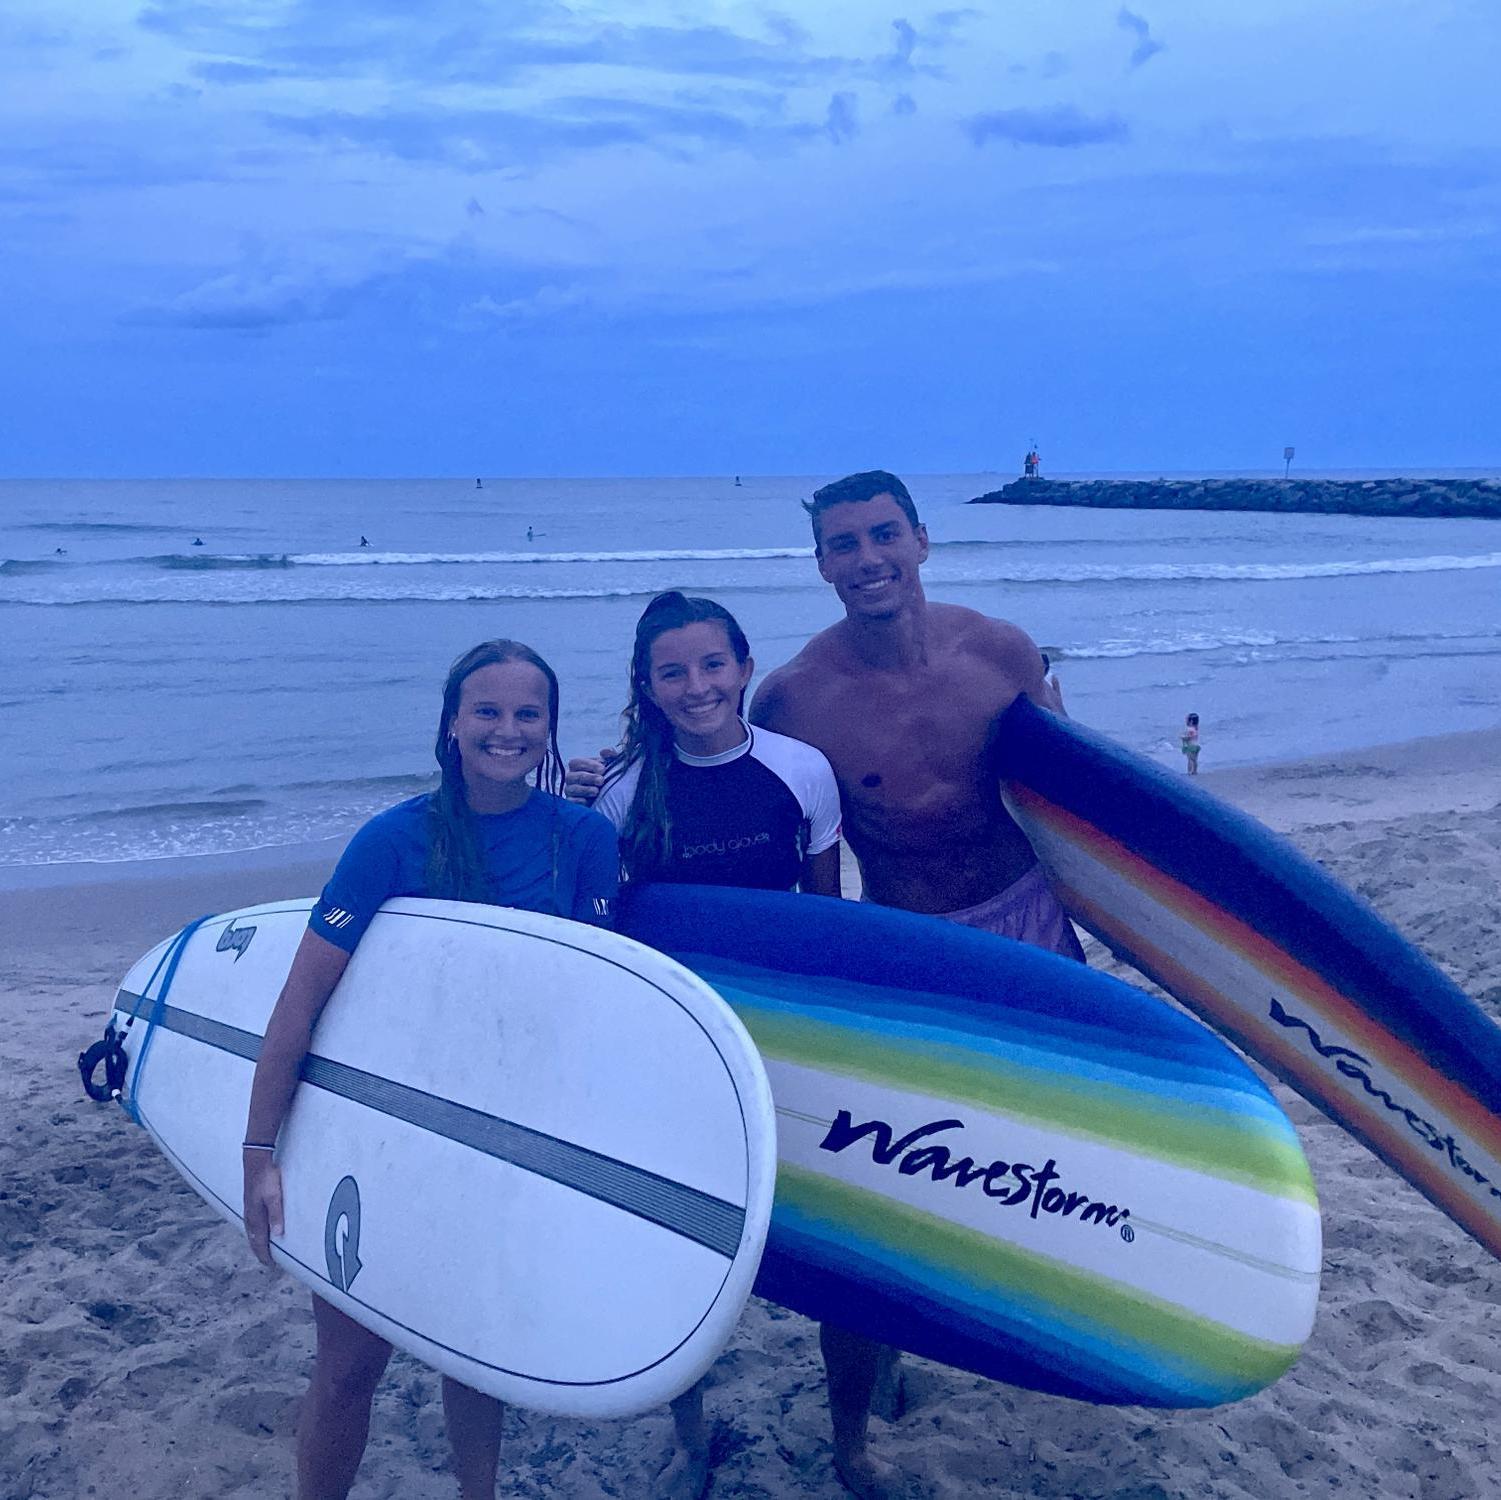 Surfing trip with some friends!